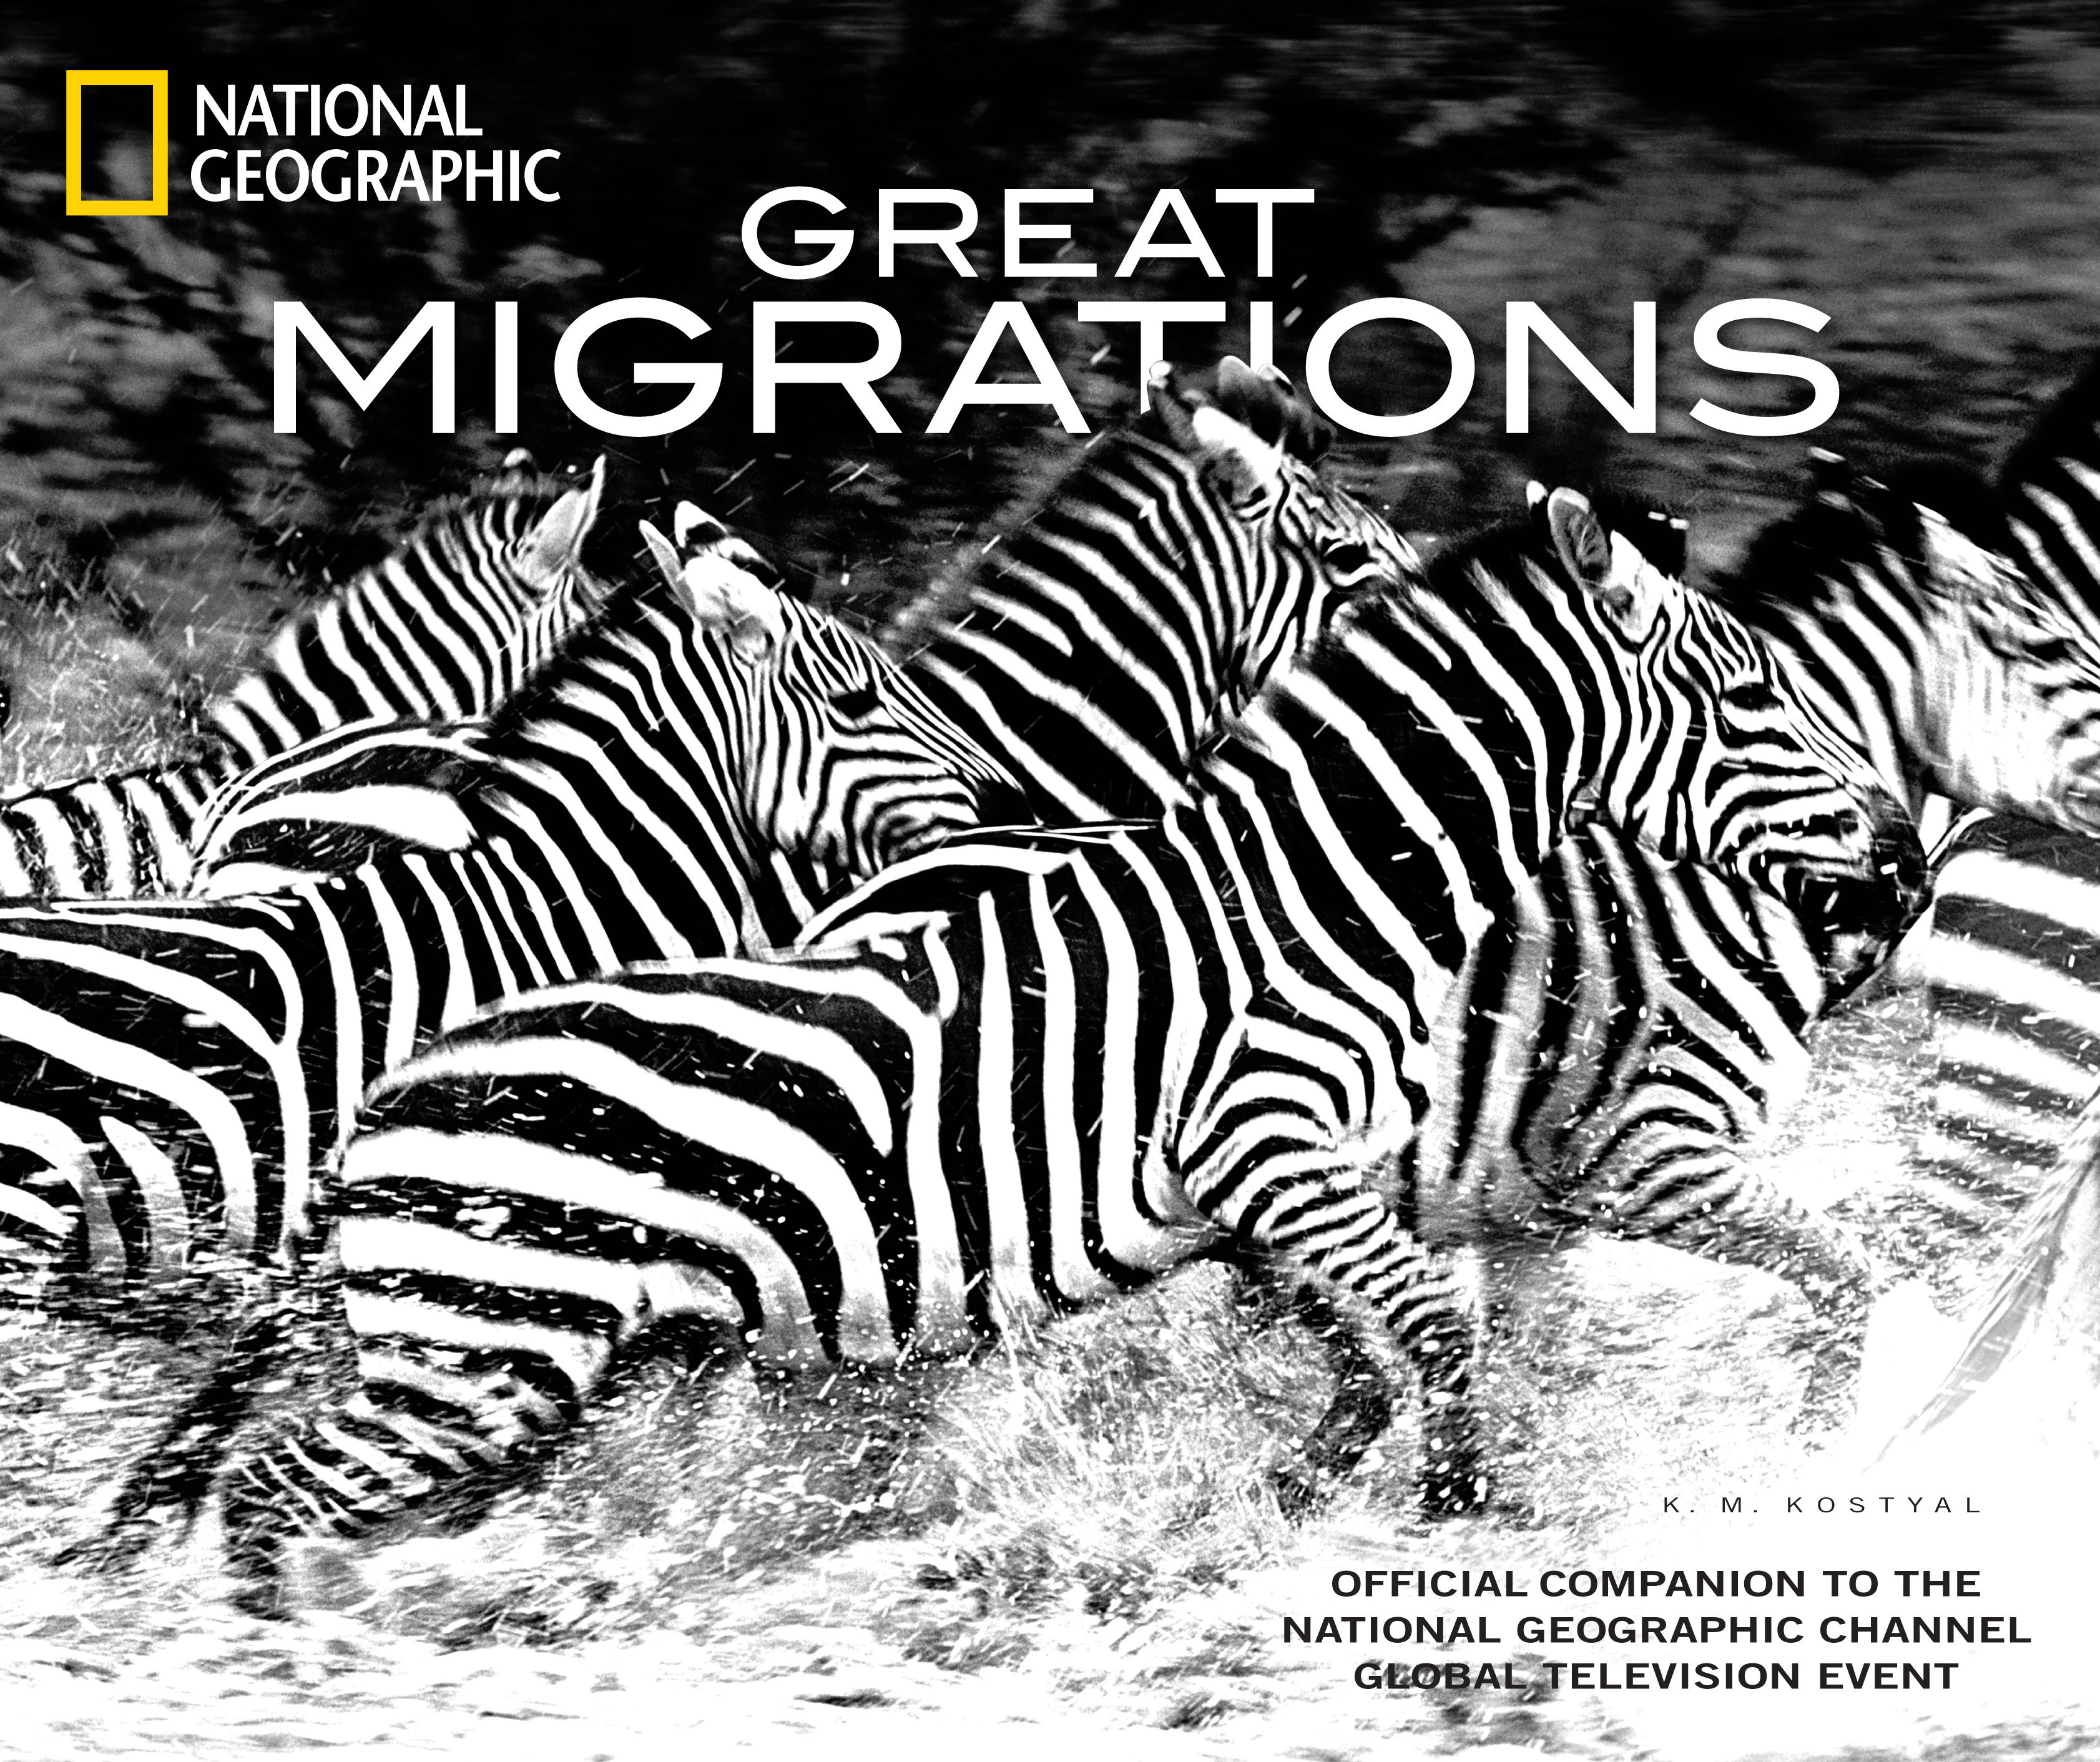 Great Migrations (Hardcover Book)